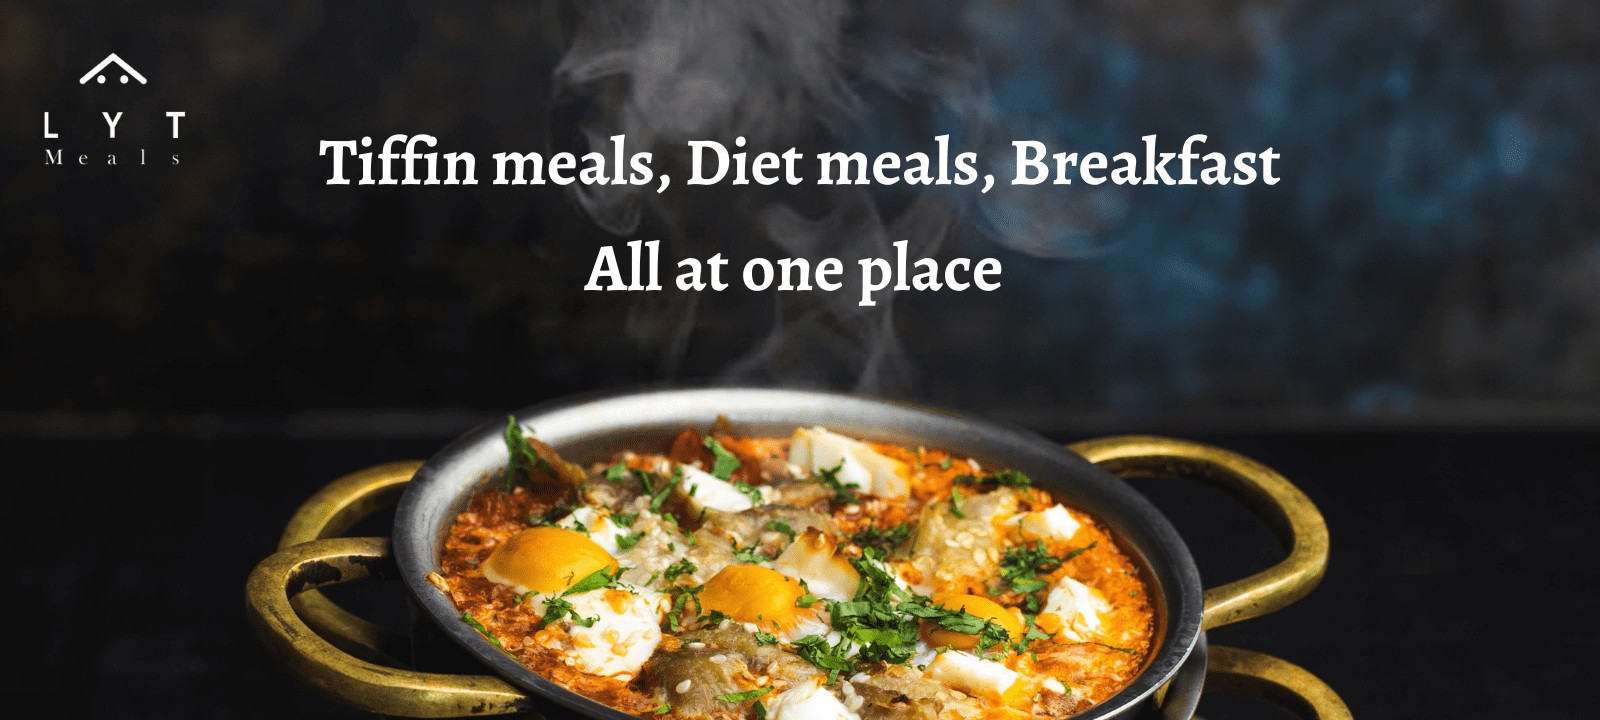 Lyt Meals - Delicious and Nutritious Meal Delivery Service - Gurgaon Recipes & Cooking Tips